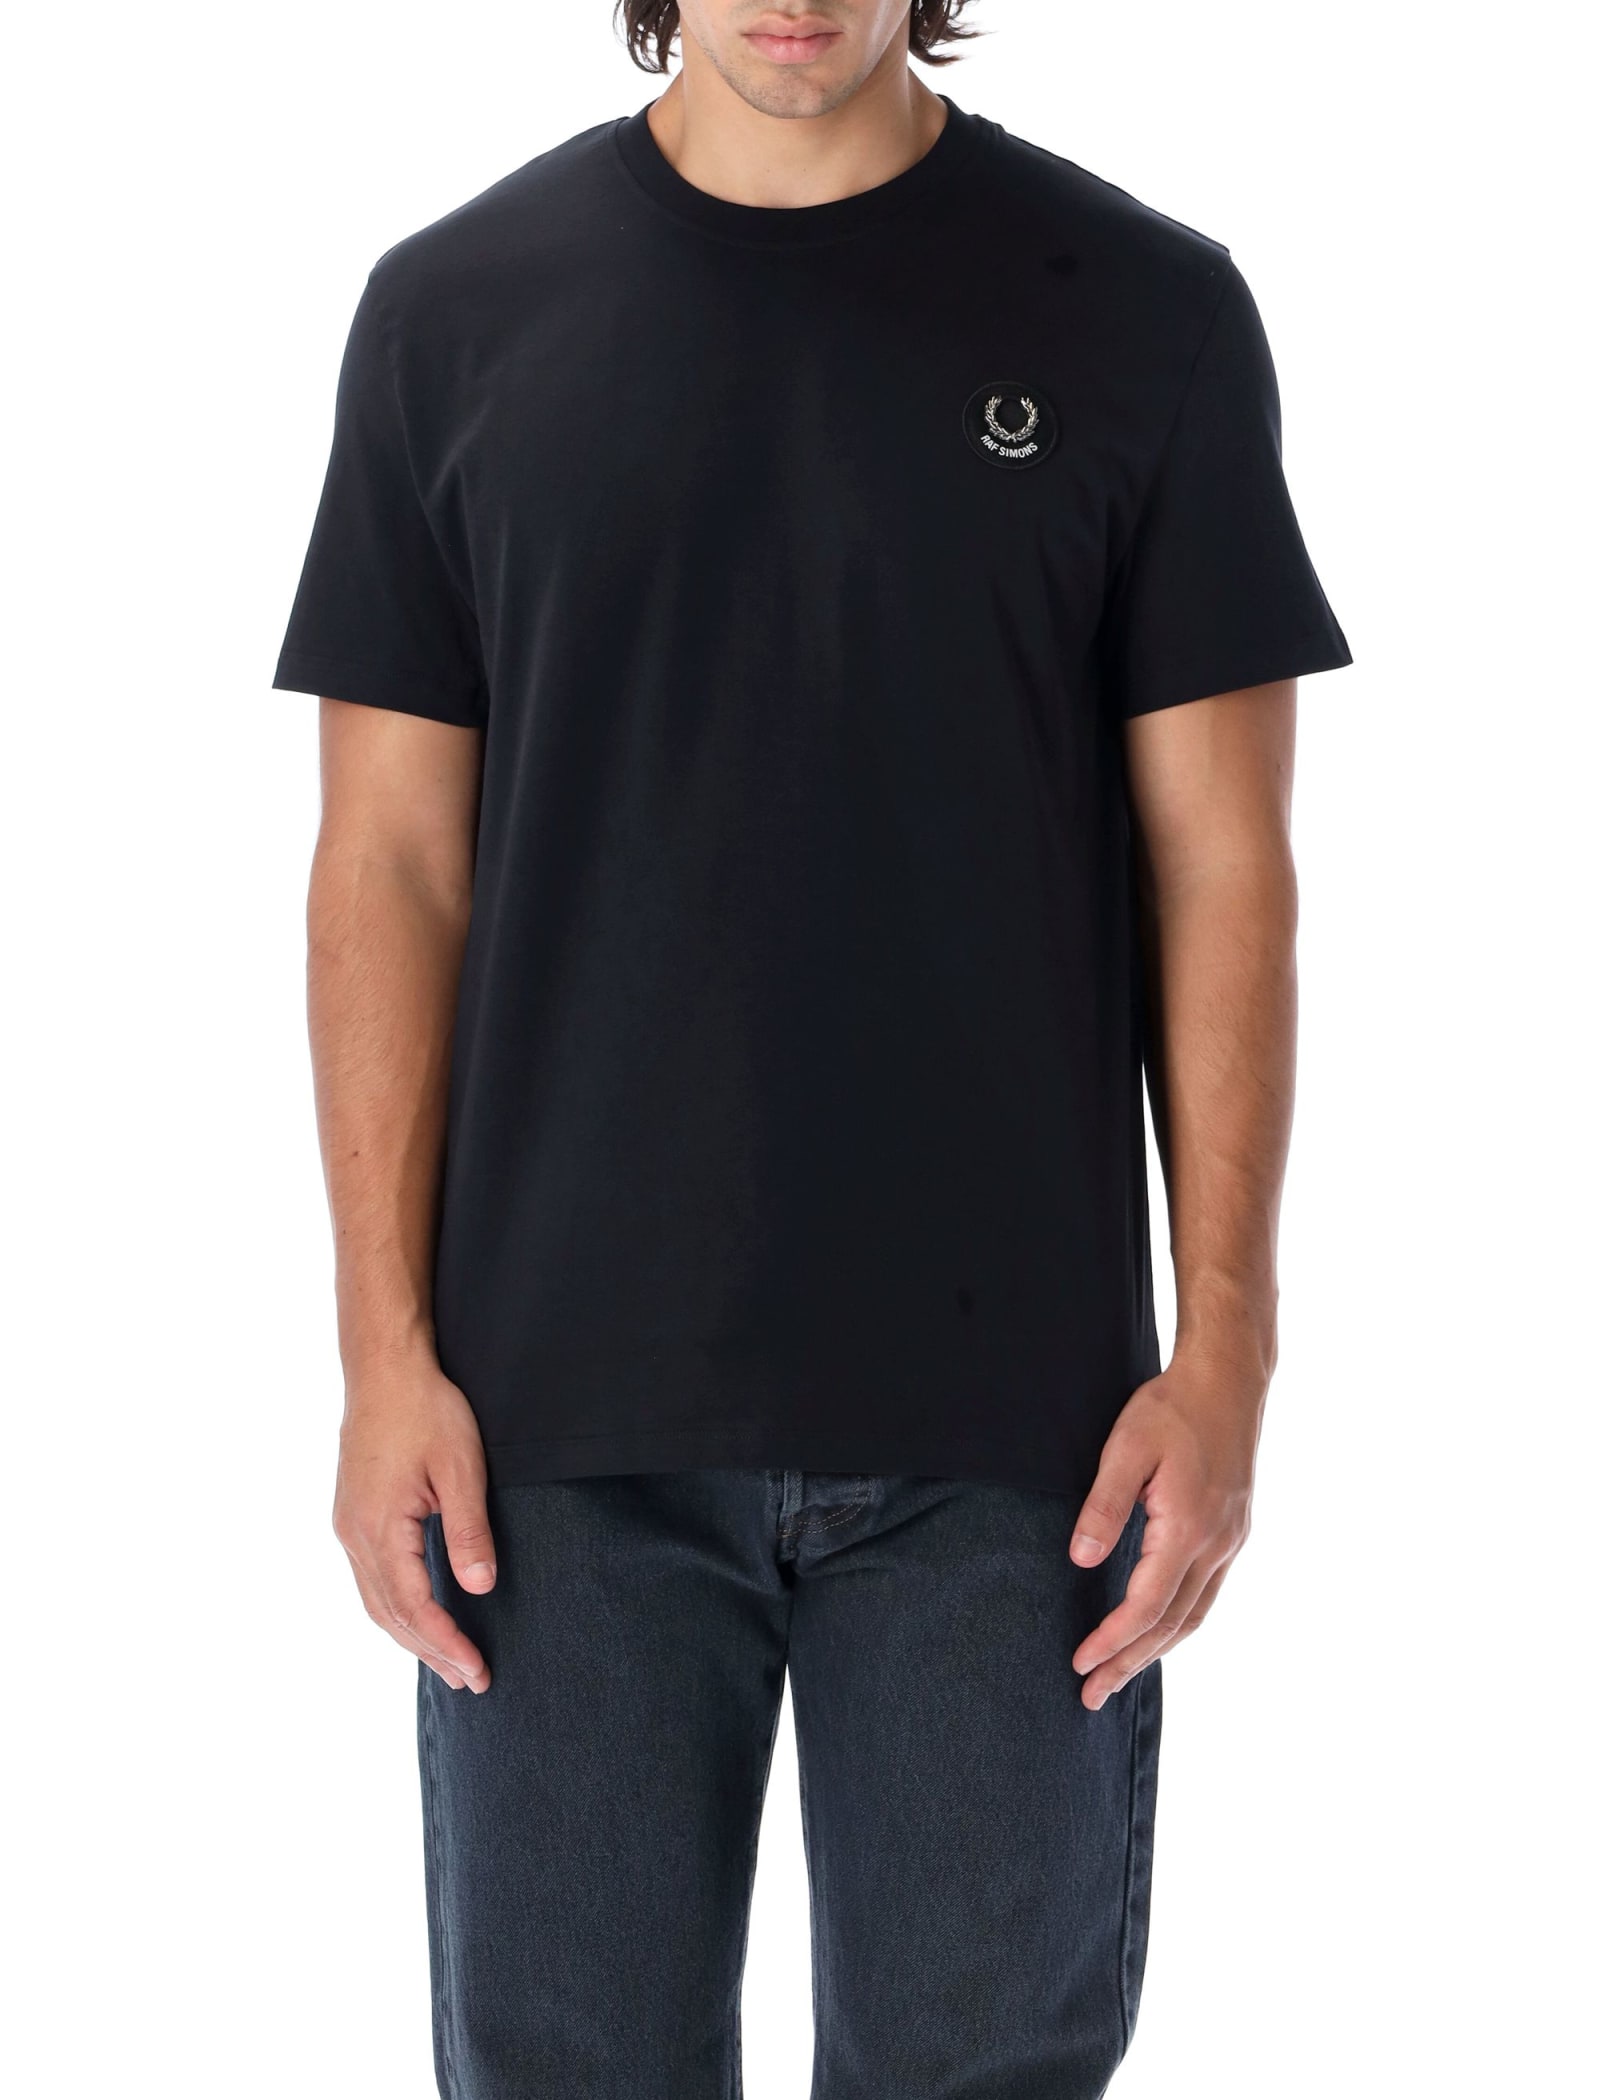 Fred Perry by Raf Simons Metal Laurel-wreath T-shirt